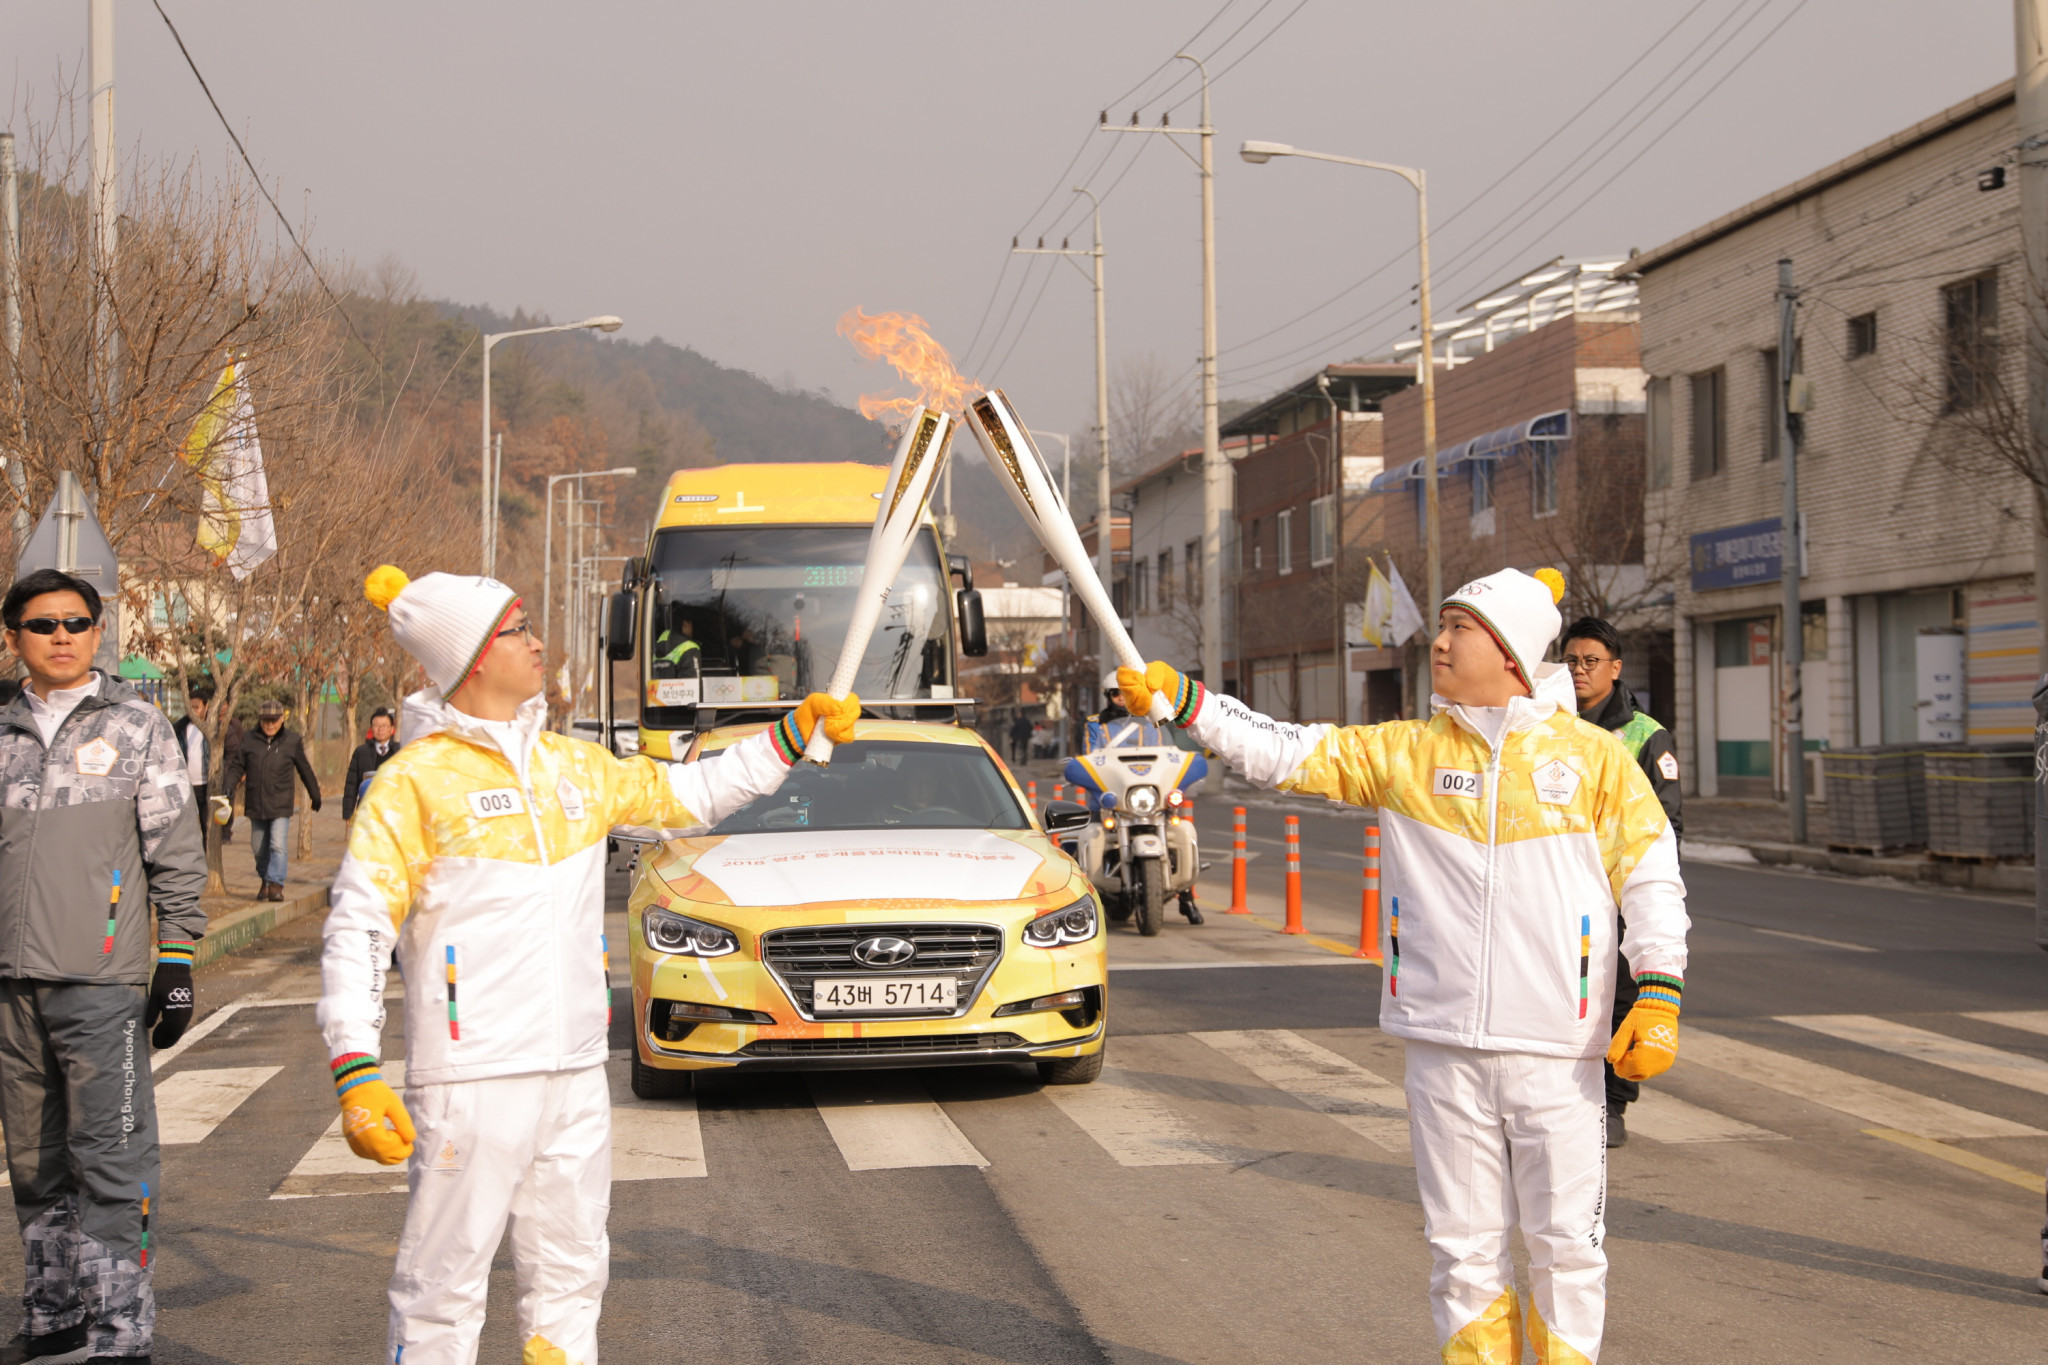 Pyeongchang 2018 Olympic Torch Relay resumes but scaled down as mark of respects to victims of Jecheon fire